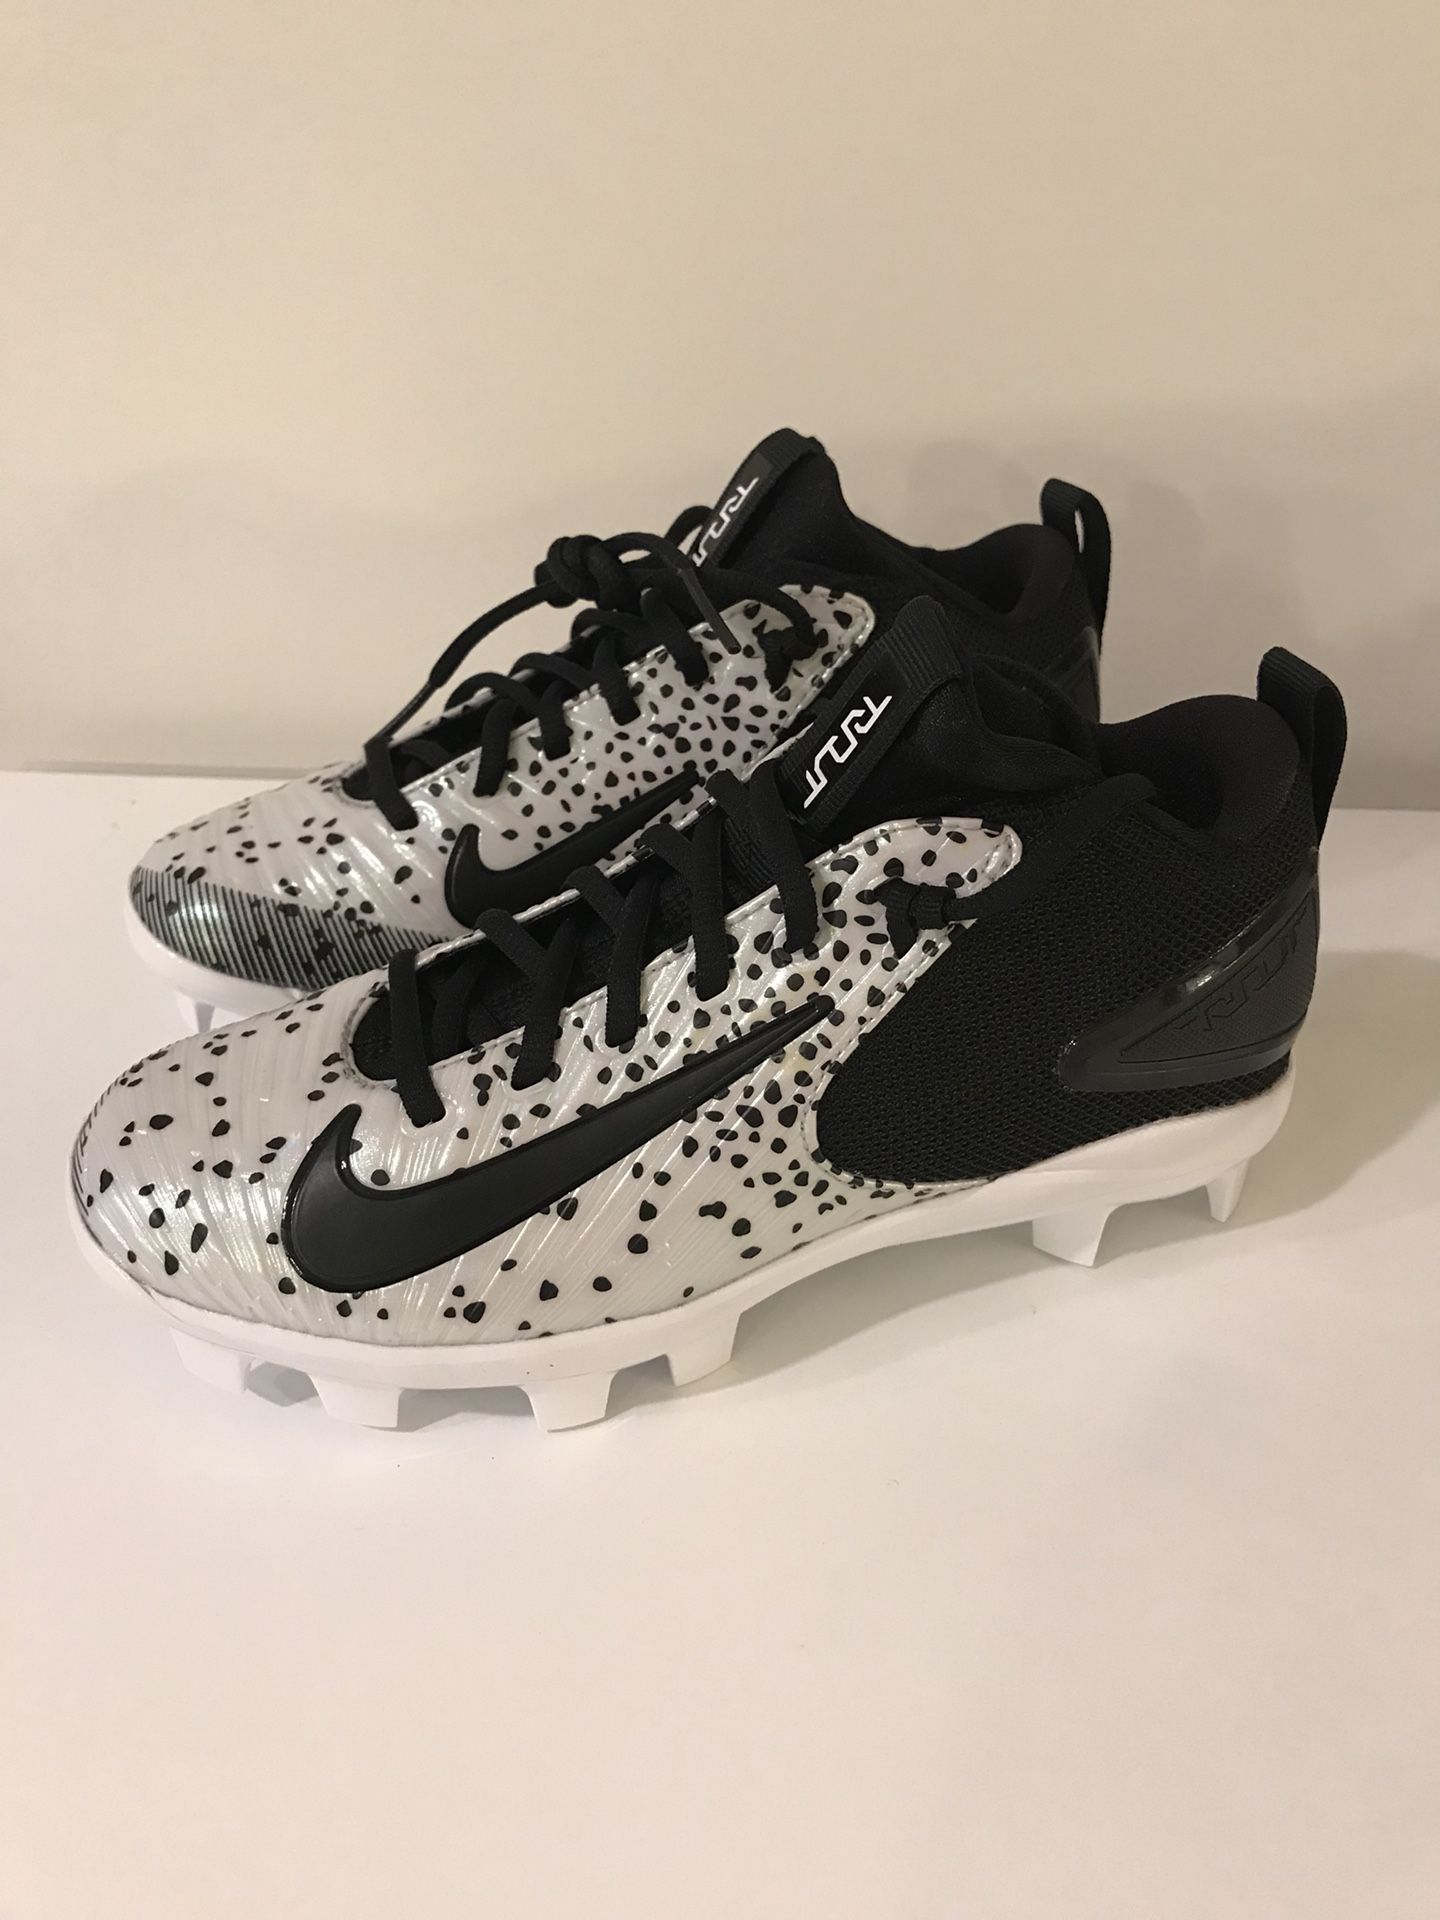 NIKE TROUT 3 PRO GRADE FISH STYLE YOUTH BASEBALL CLEATS SIZE 4.5Y 856499-009